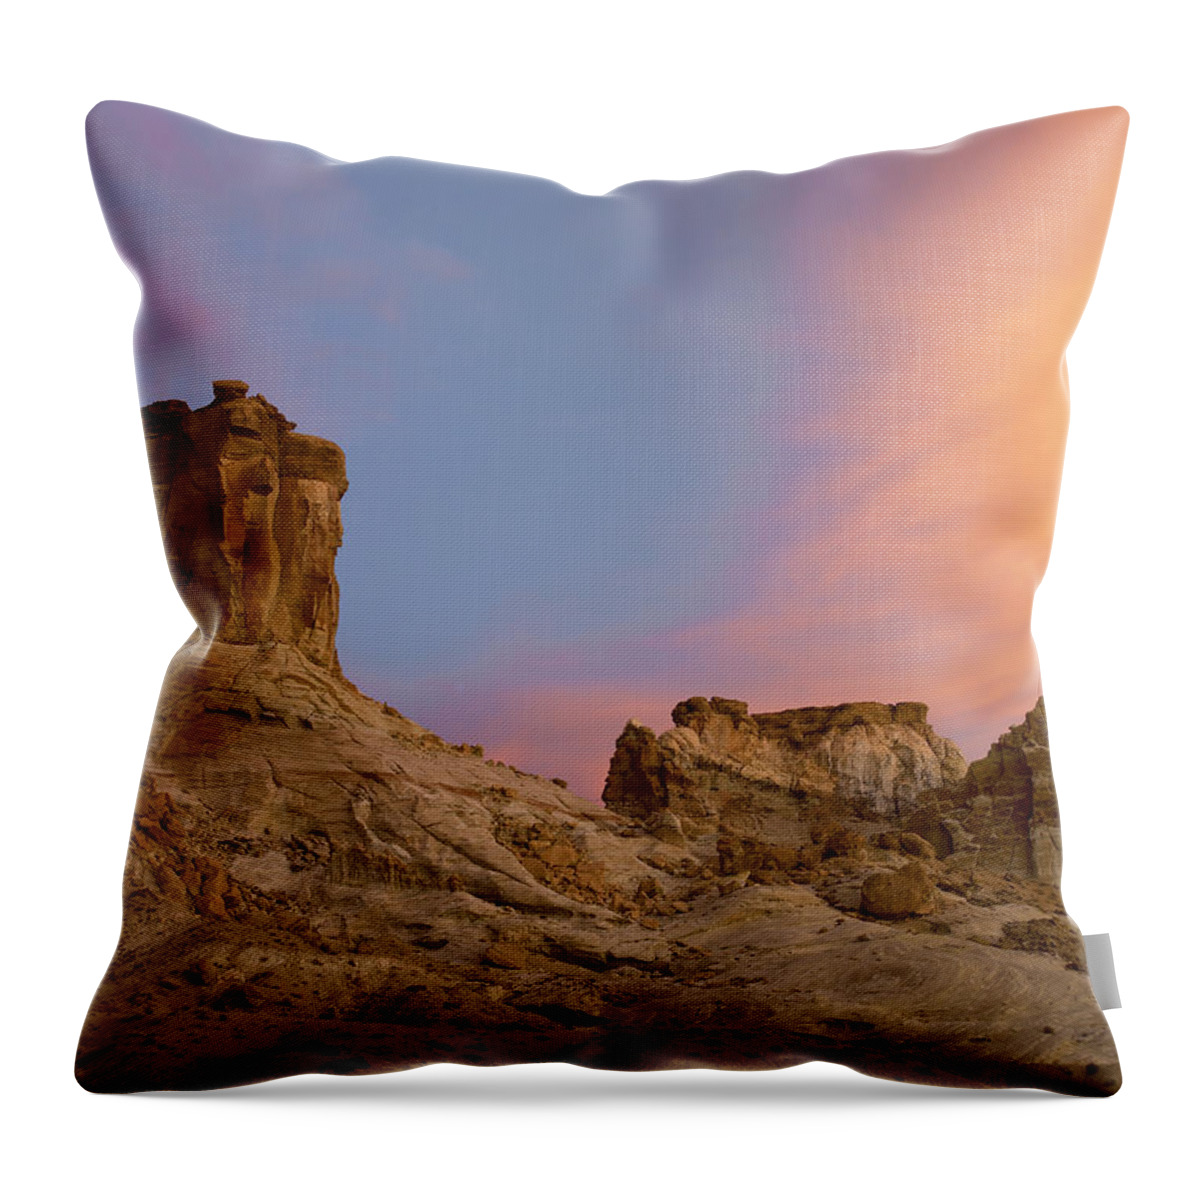 00175556 Throw Pillow featuring the photograph Sandstone Formations In Kaiparowits #2 by Tim Fitzharris